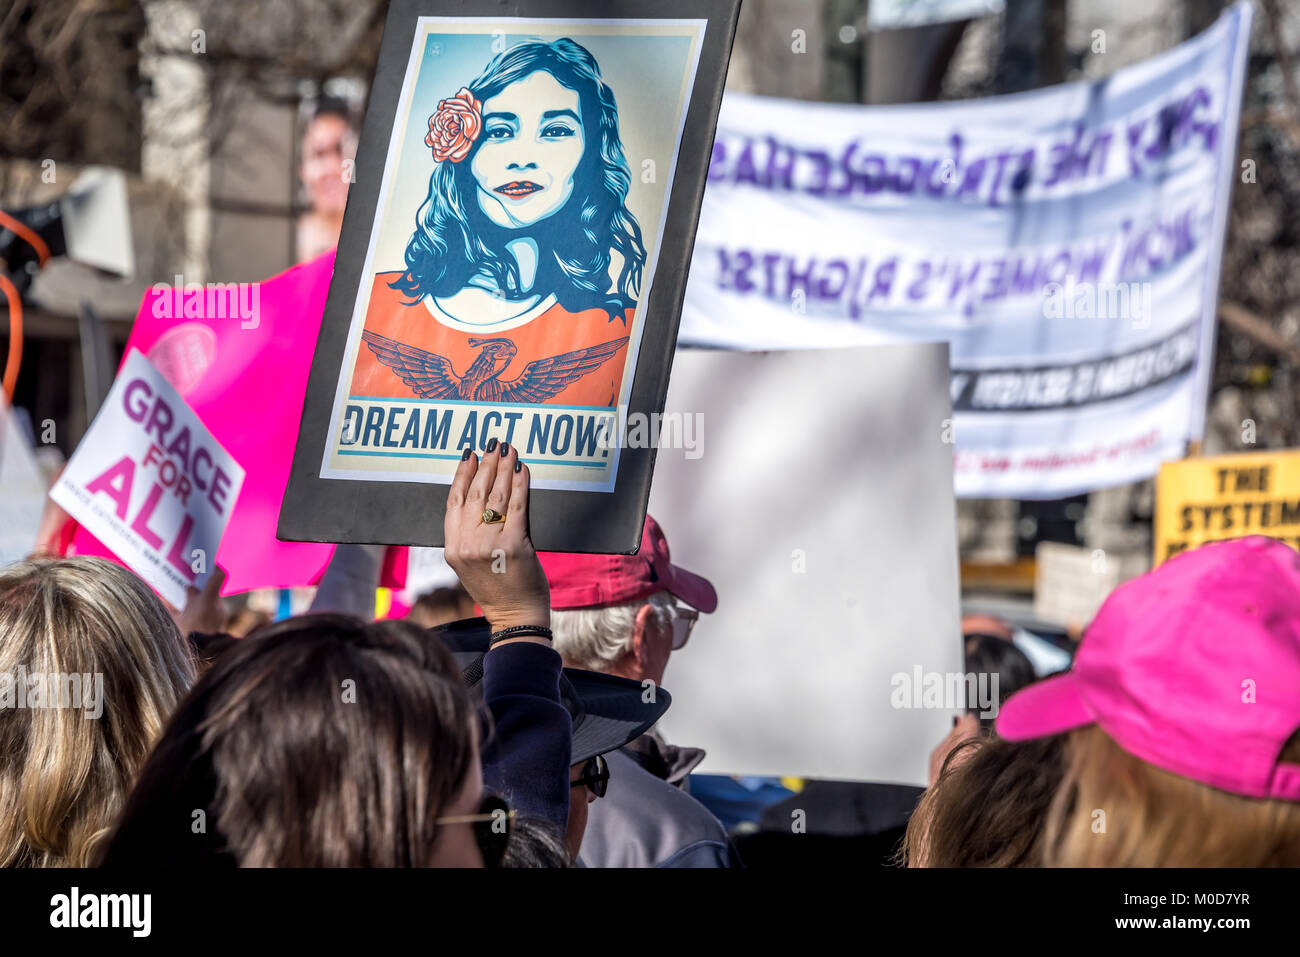 San Francisco, California, USA. 20th January, 2018. The 2018 Women's March in San Francisco, organized by Women's March Bay Area. As protesters march down Market Street, a woman in the crowd holds up a sign for 'Dream Act Now,' calling for action about the 'Dreamers' and DACA. Stock Photo